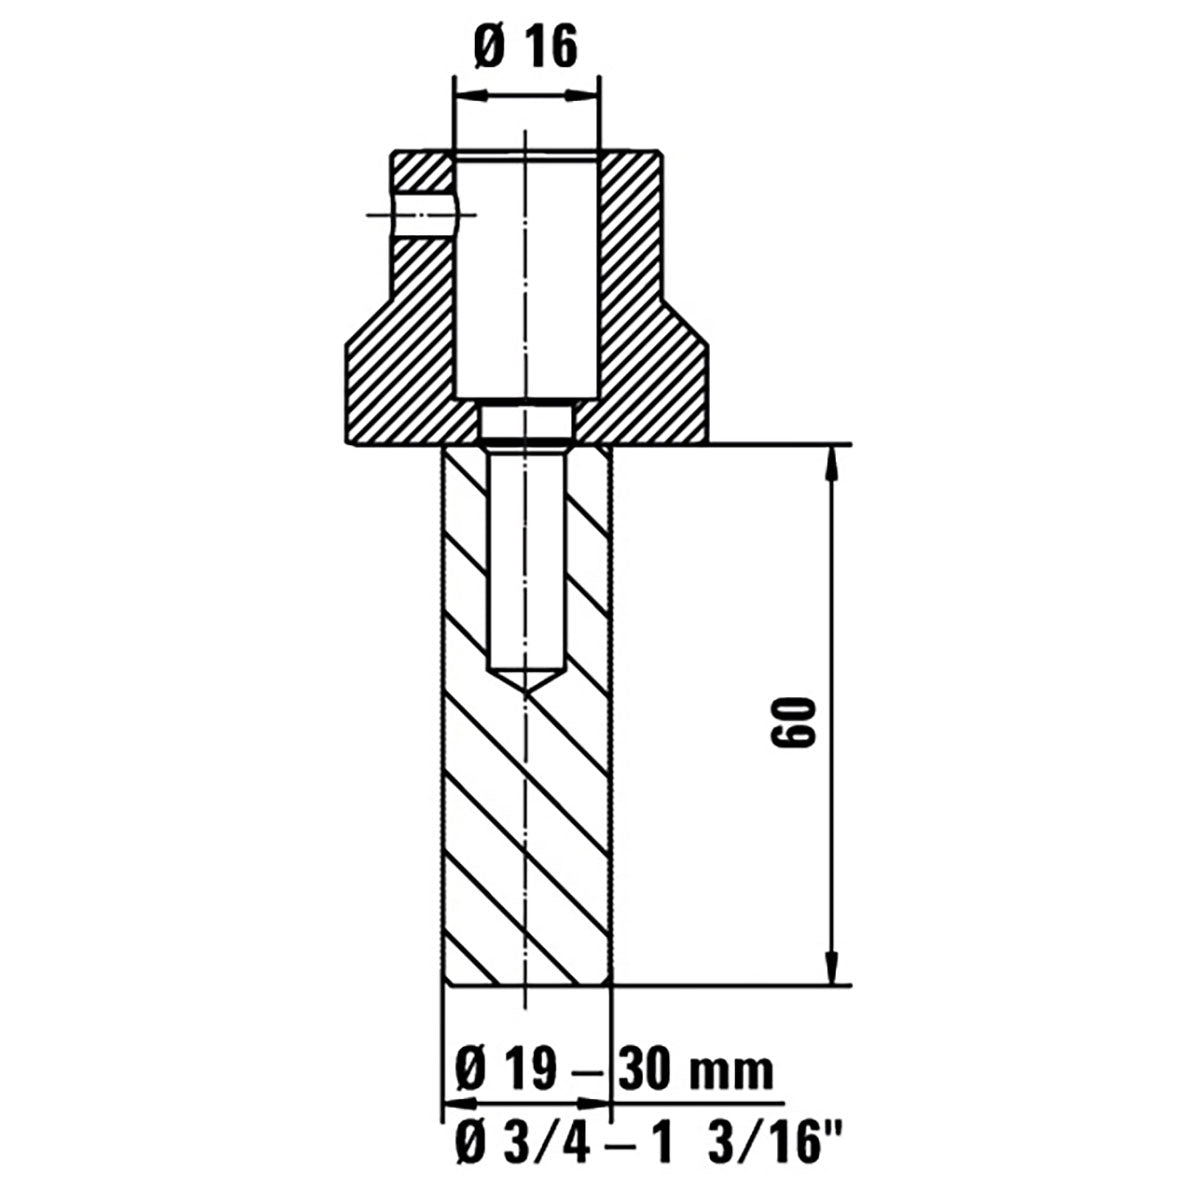 Bessey TW16AW25 - Adapter for Bessey TW16AW25 fasteners